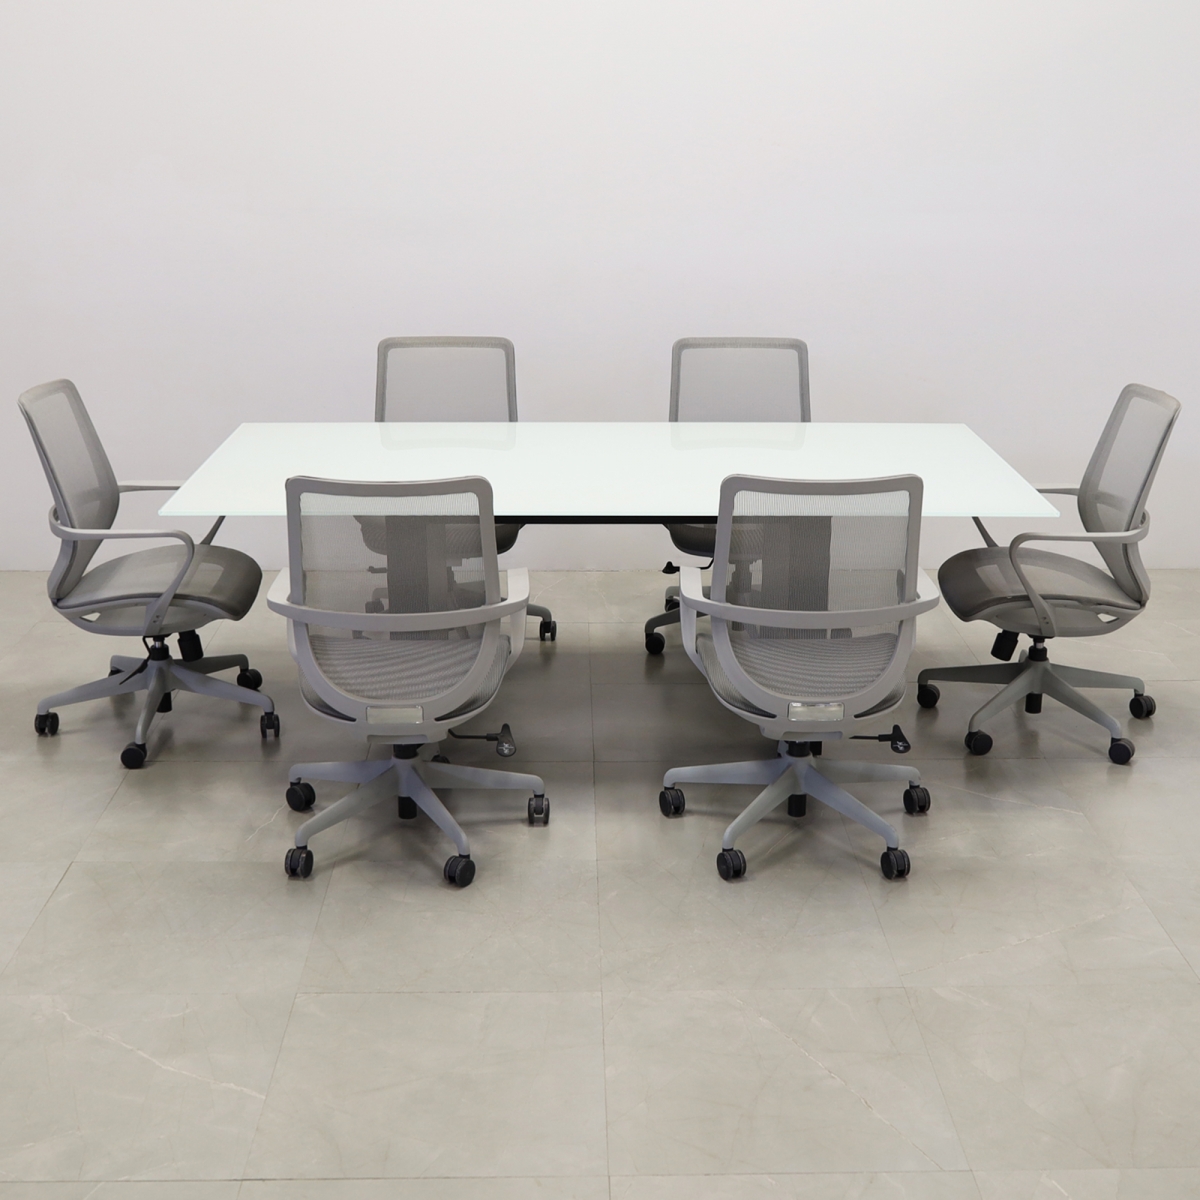 Omaha Rectangular Conference Table in White Tempered Glass Top - 90 In. - Stock #59